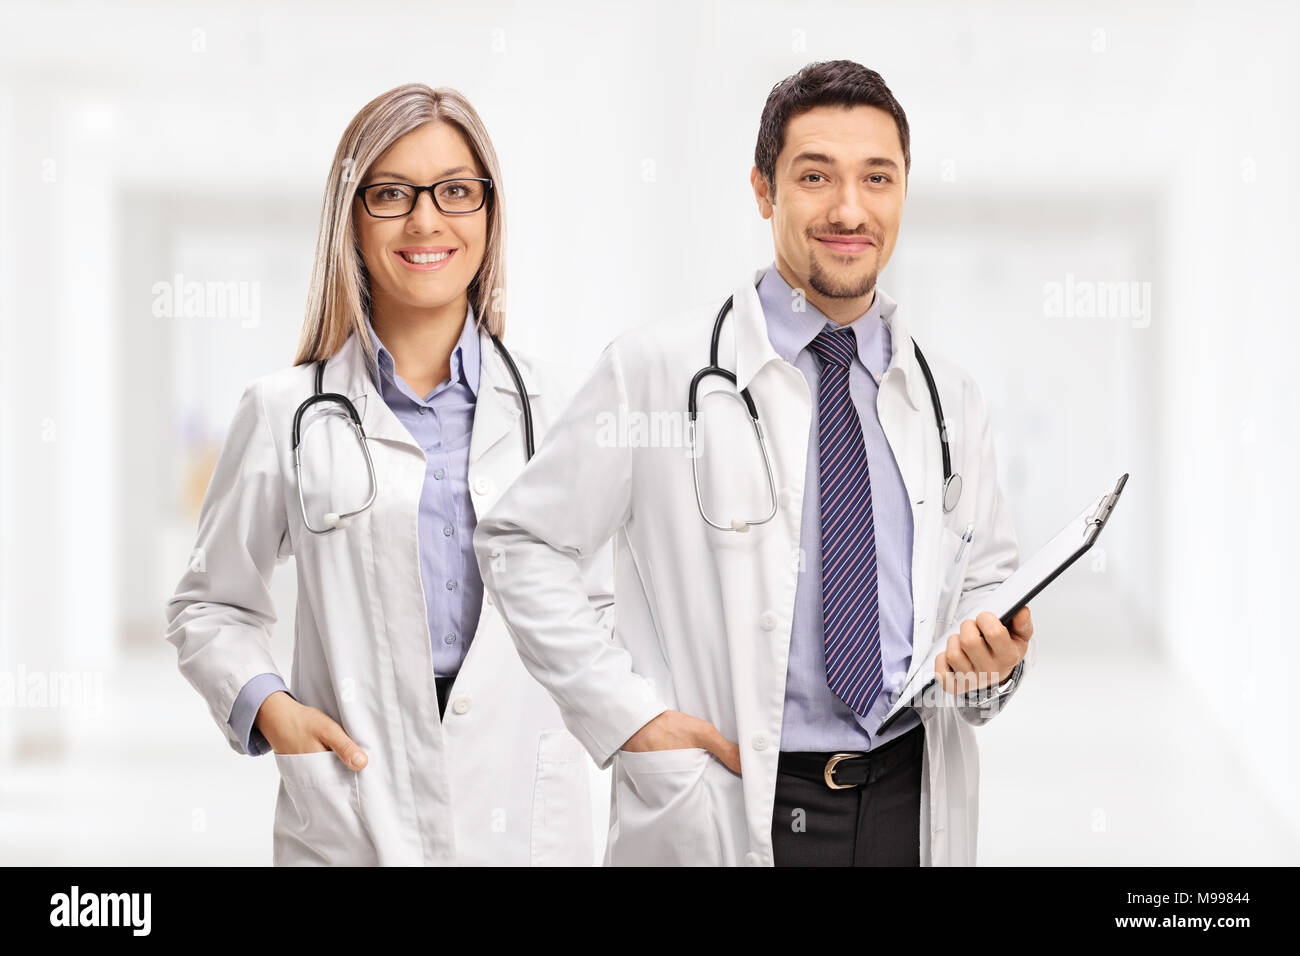 Female doctor and a male doctor with a clipboard looking at the camera and smiling Stock Photo